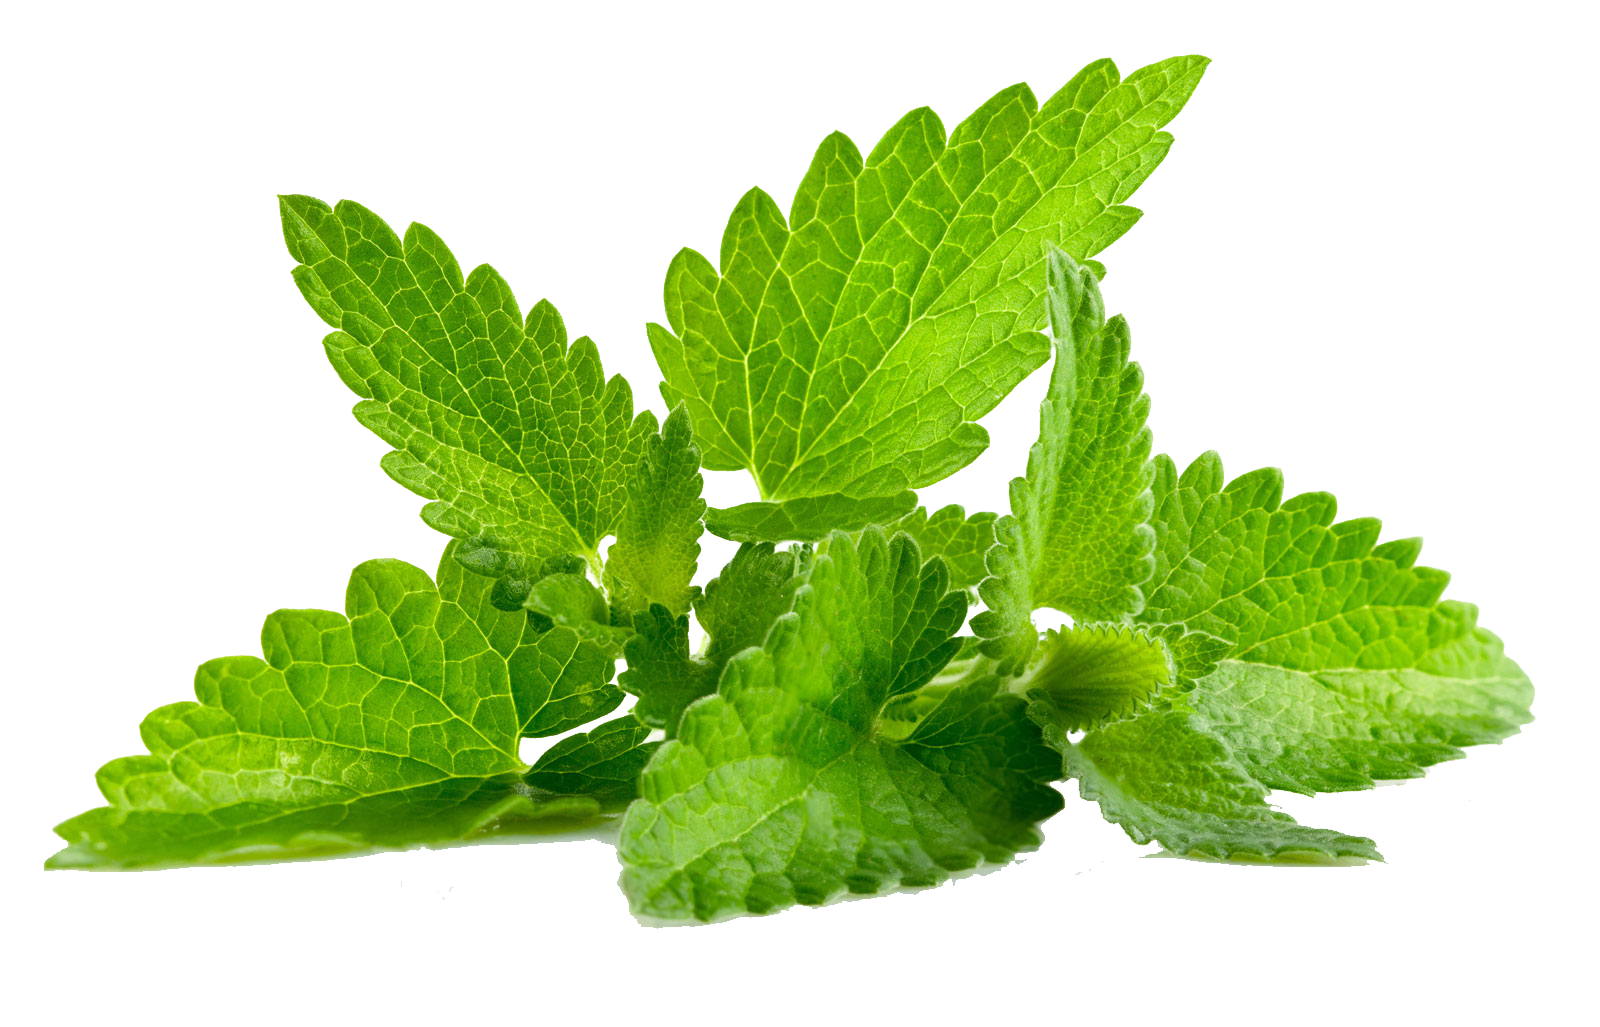 Mint Leaves Background PNG Image